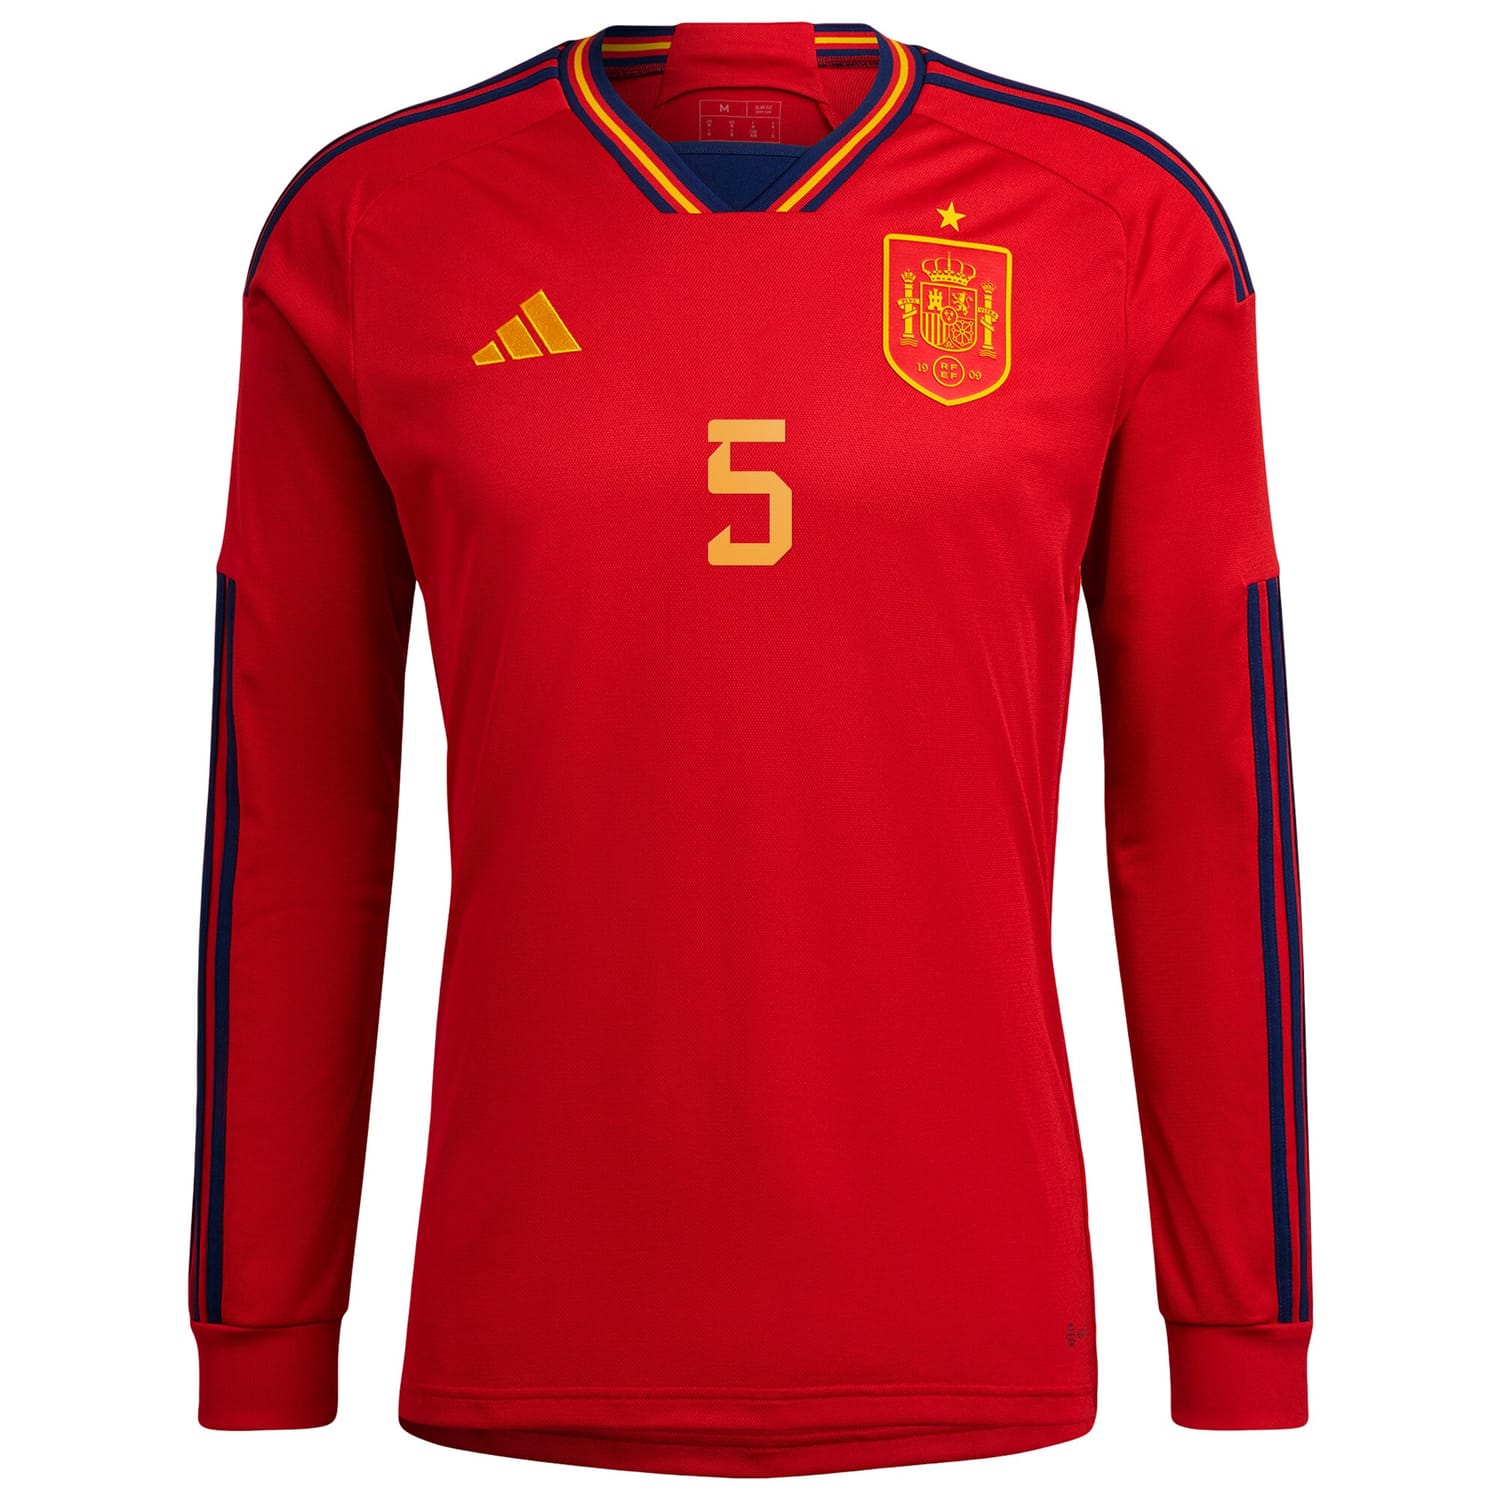 Spain National Team Home Jersey Shirt Long Sleeve Red 2022-23 player Sergio Busquets printing for Men